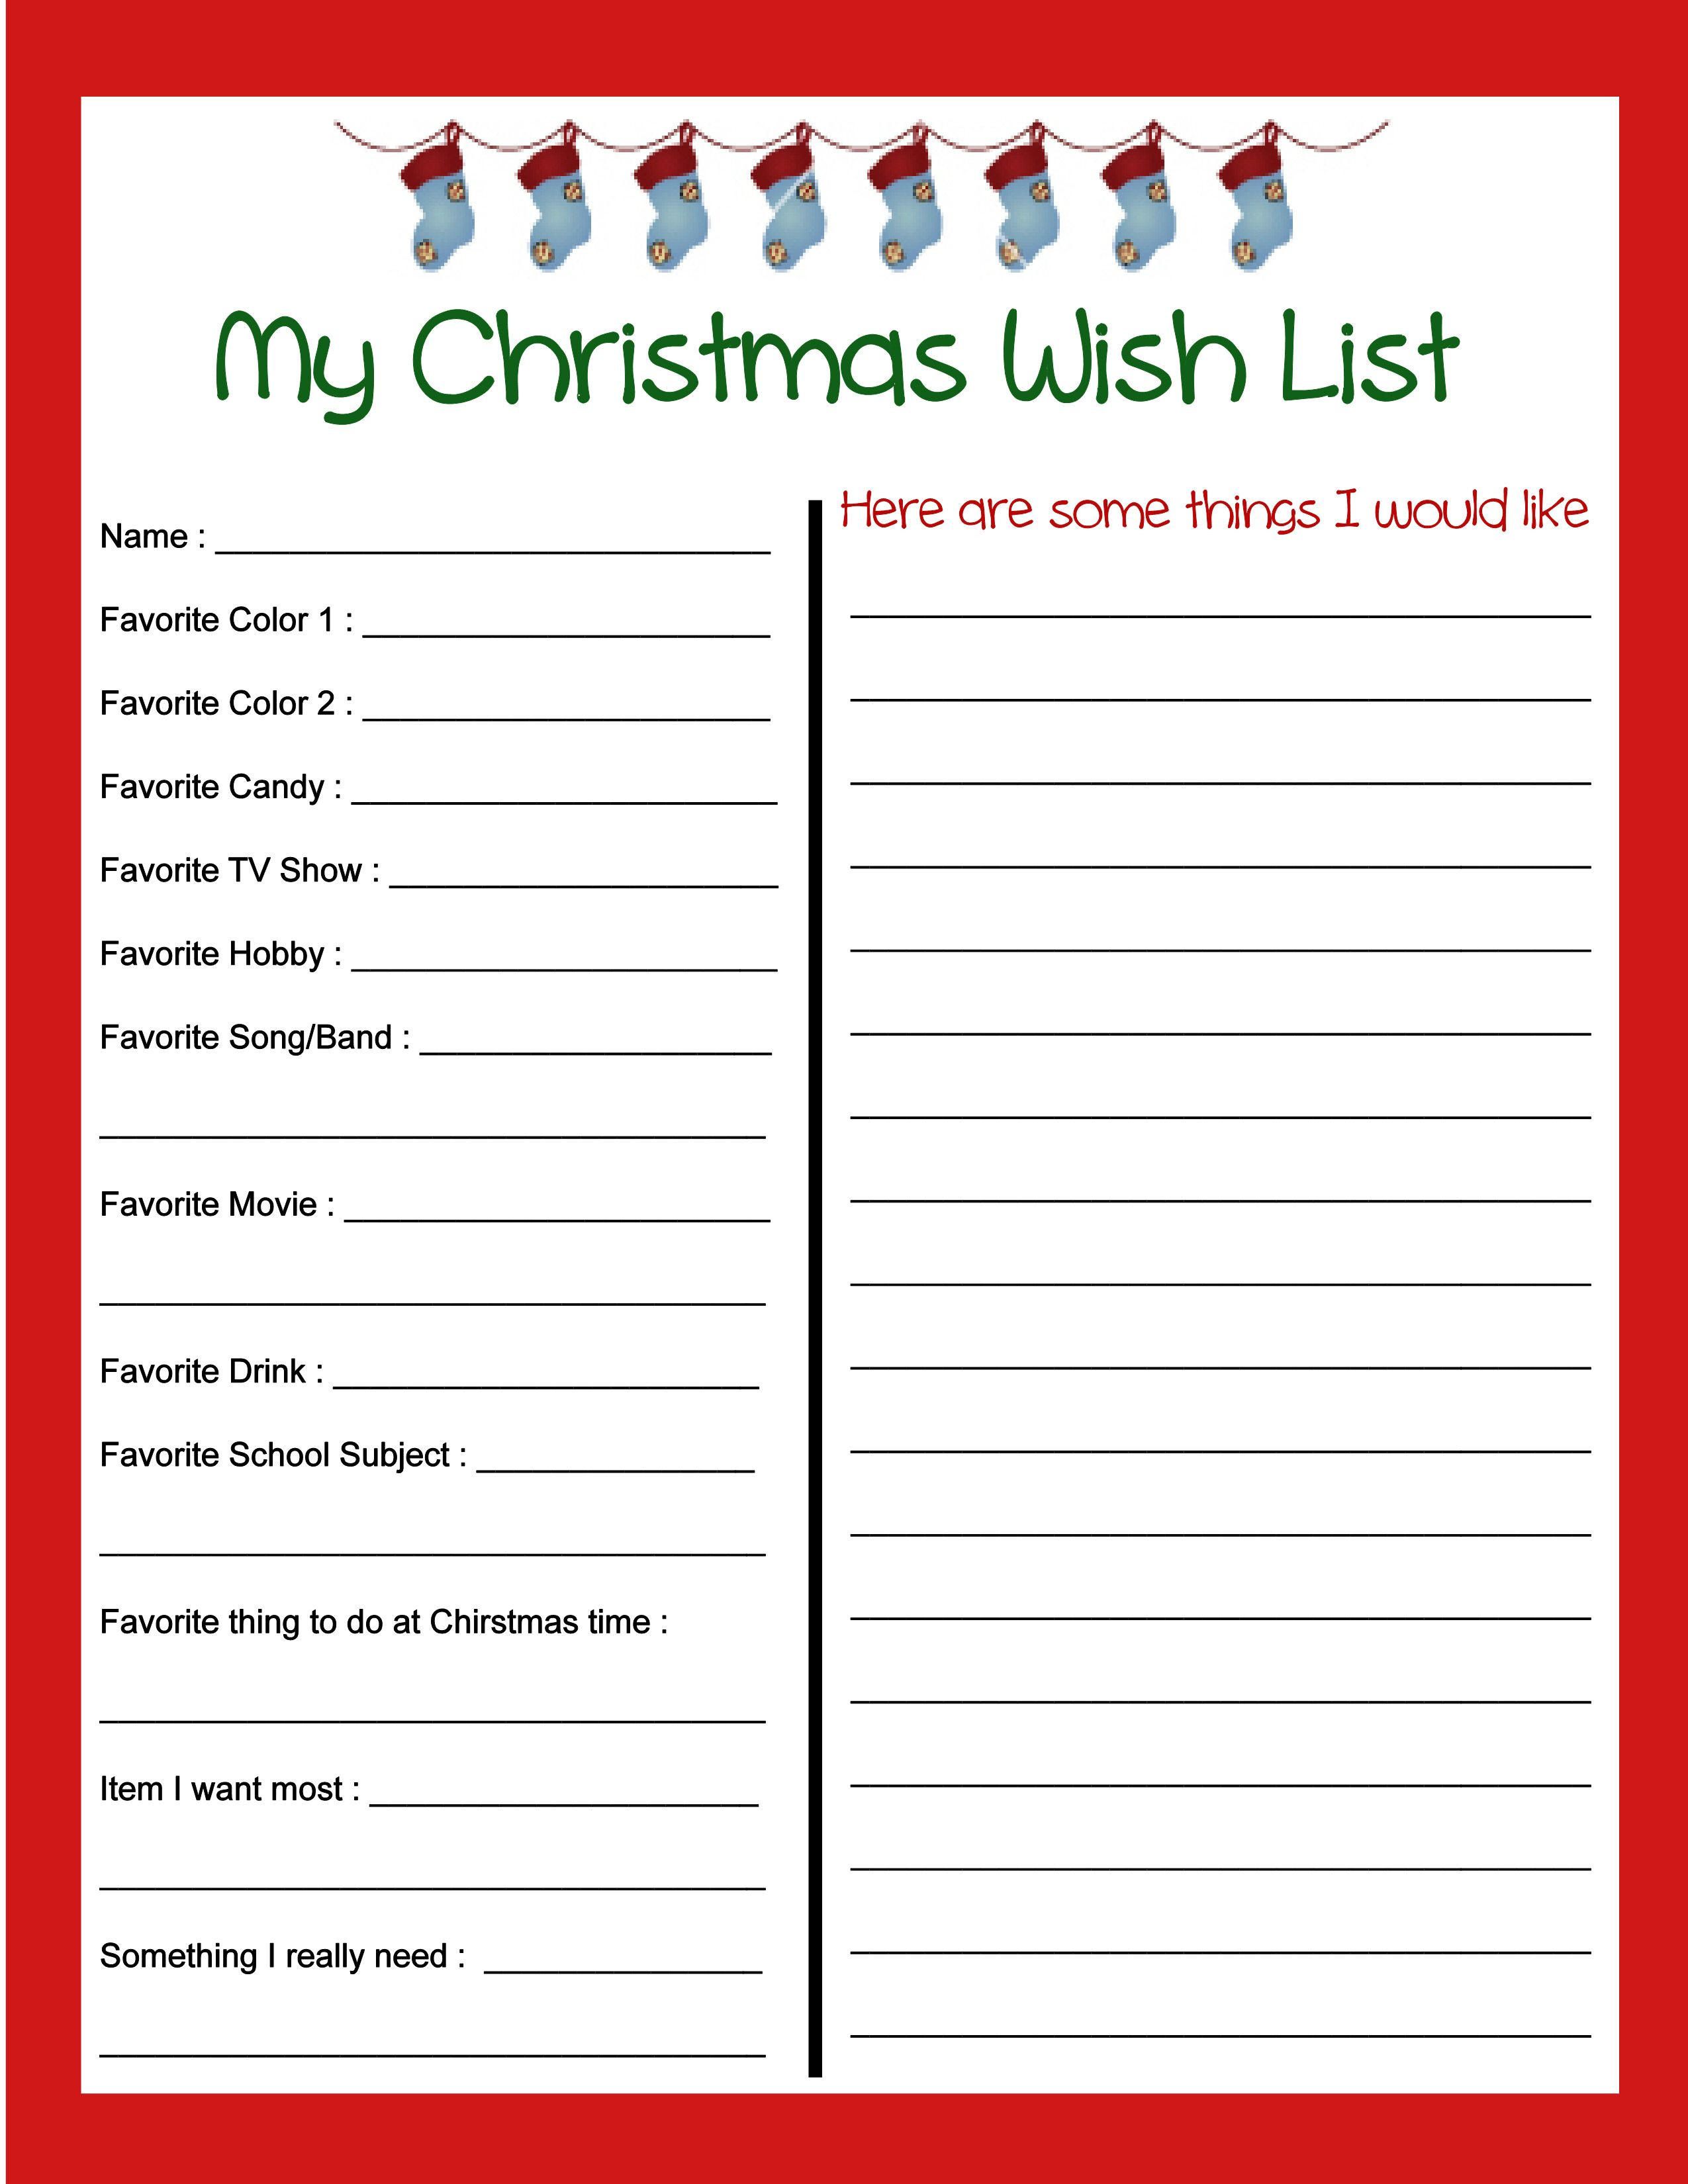 Christmas Gift List Ideas
 Pin by Becky Stout on CHRISTMAS